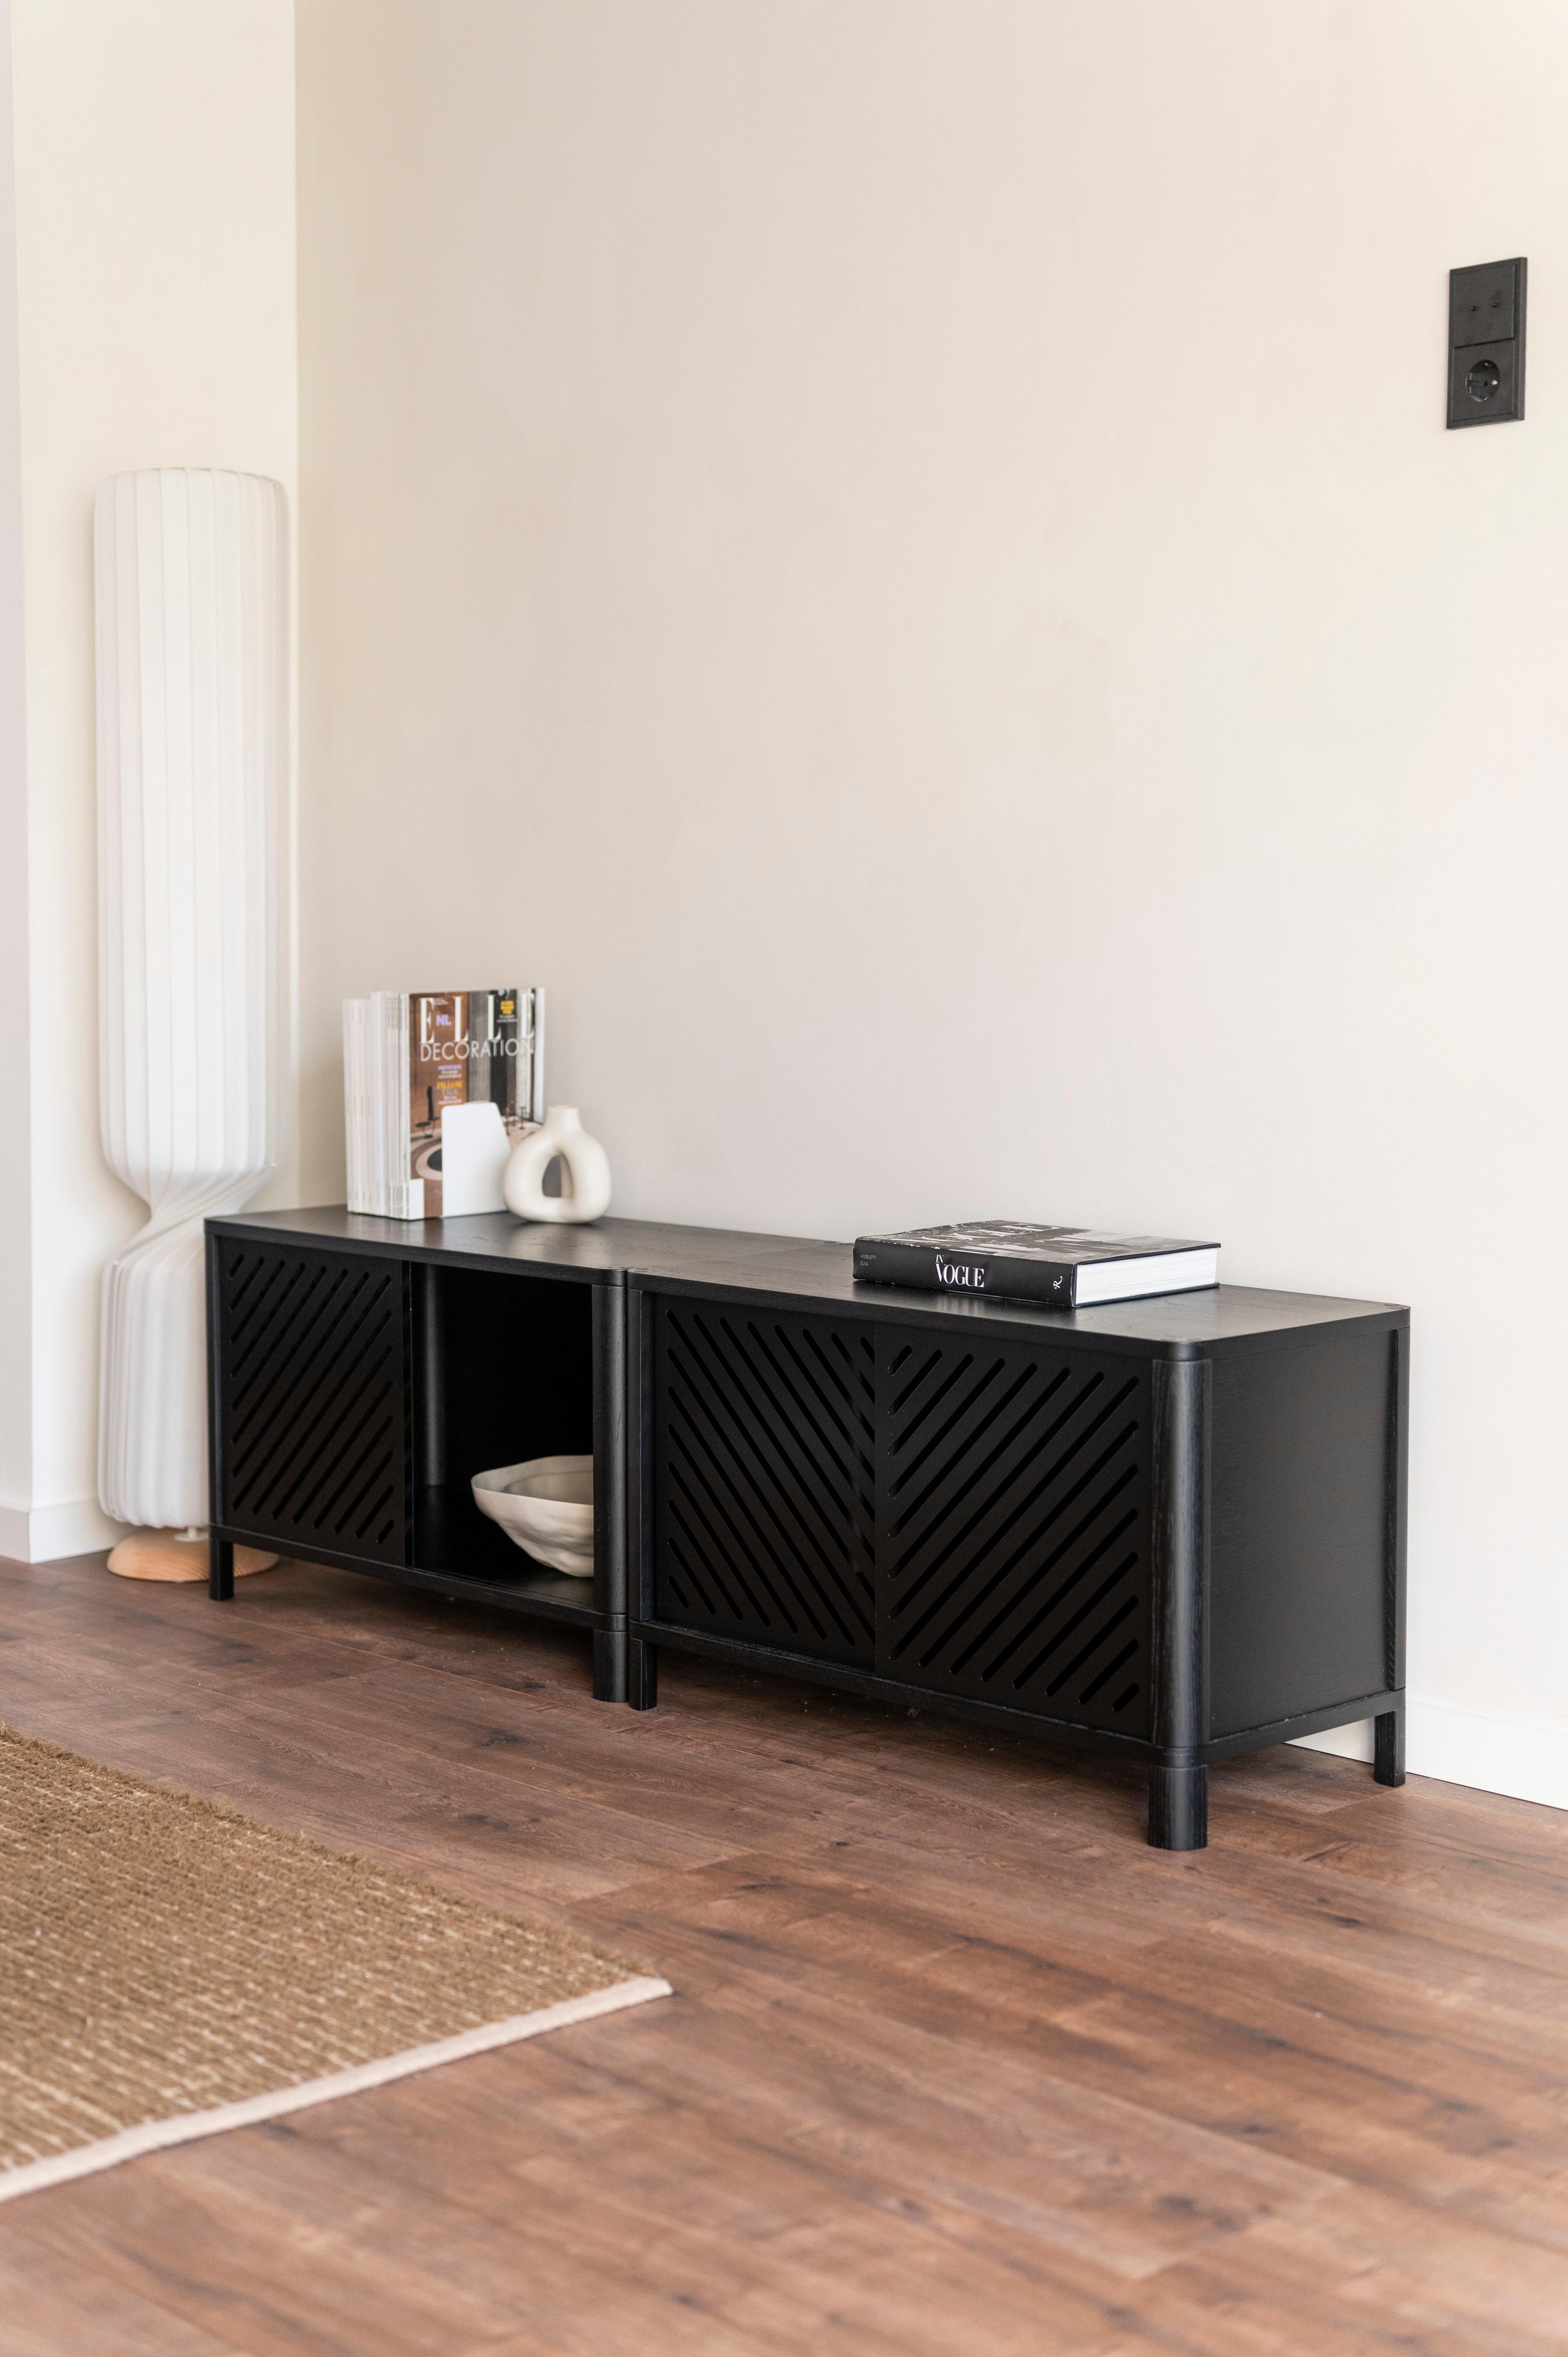 Meet Cloe an expansive way to furnish your space exactly how you need it and like it. Pick yours, enjoy it, expand it, reduce it, up, down, left or right, covered, uncovered…without limits. Transform it into exactly what you need like a bookshelf,